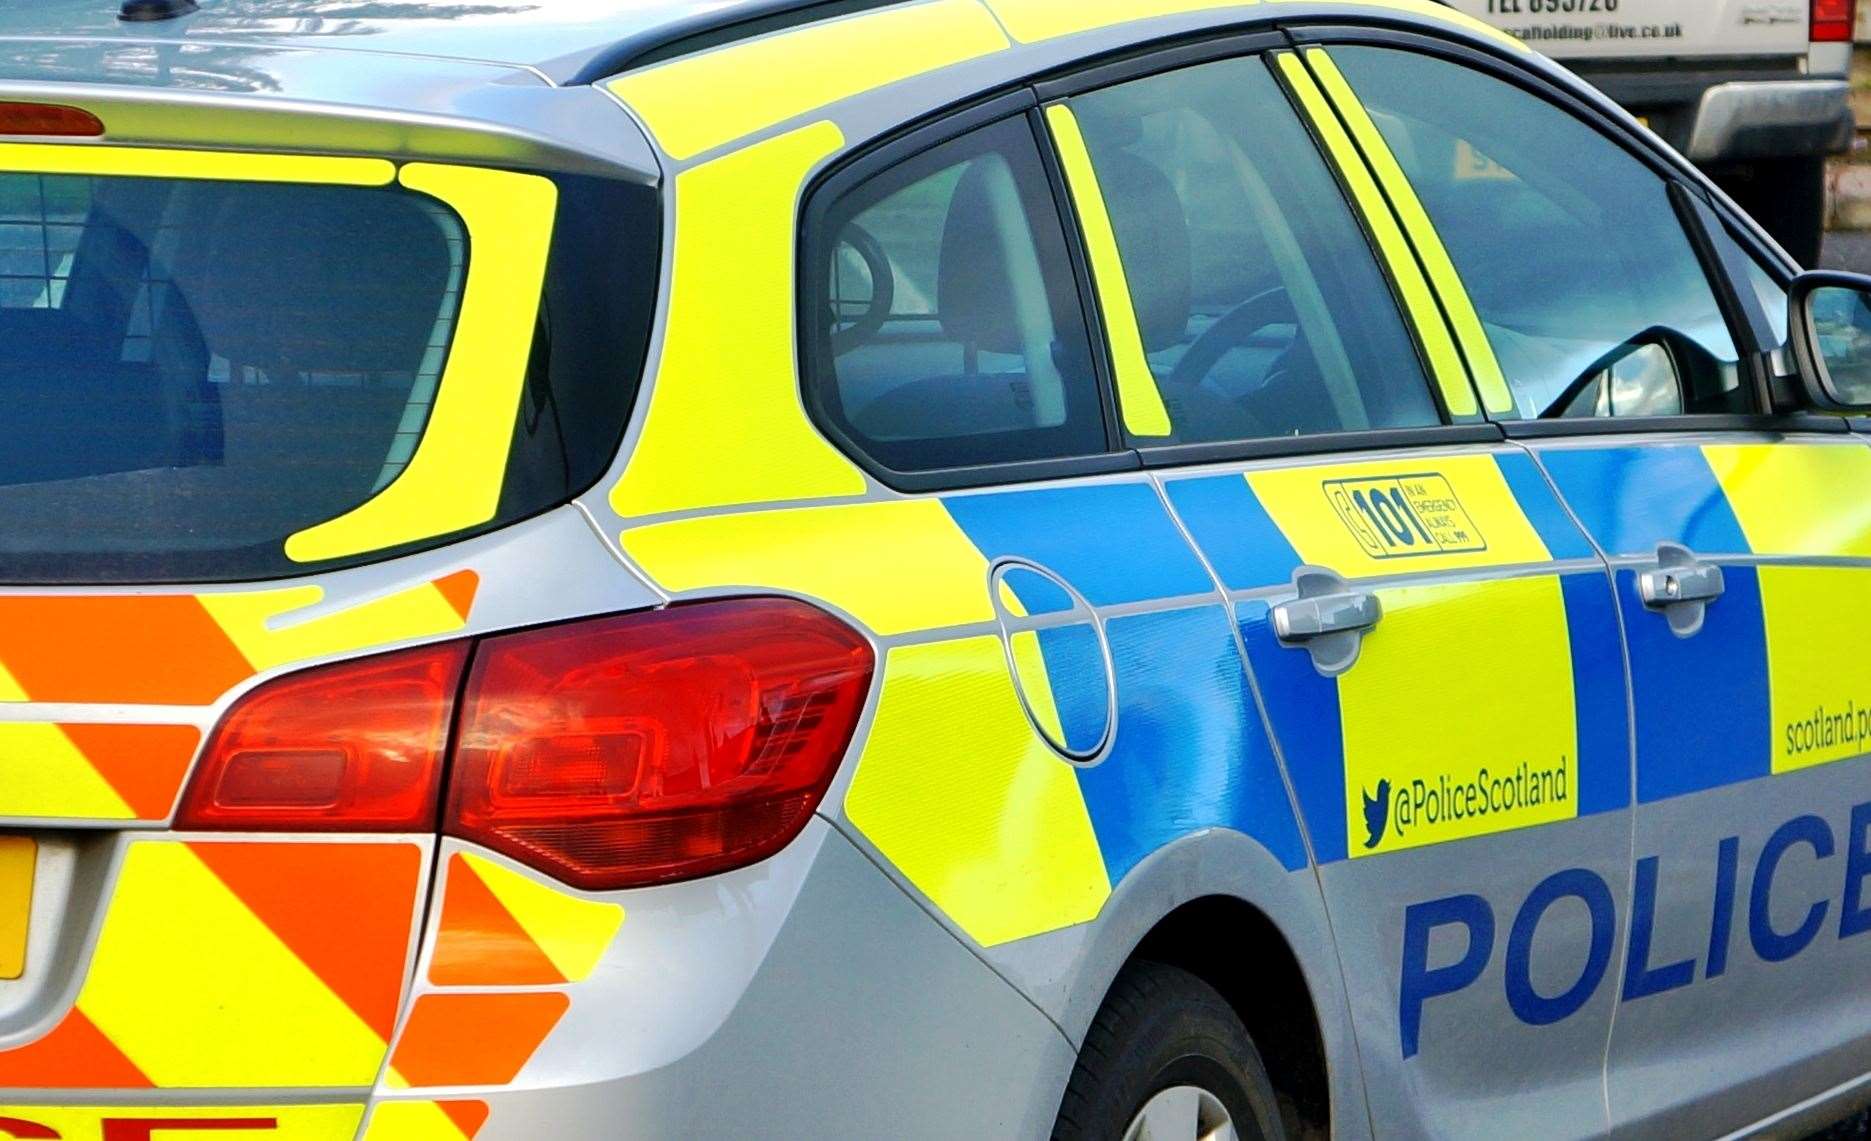 Police Scotland have arrested a teenager following a robbery in Dingwall.